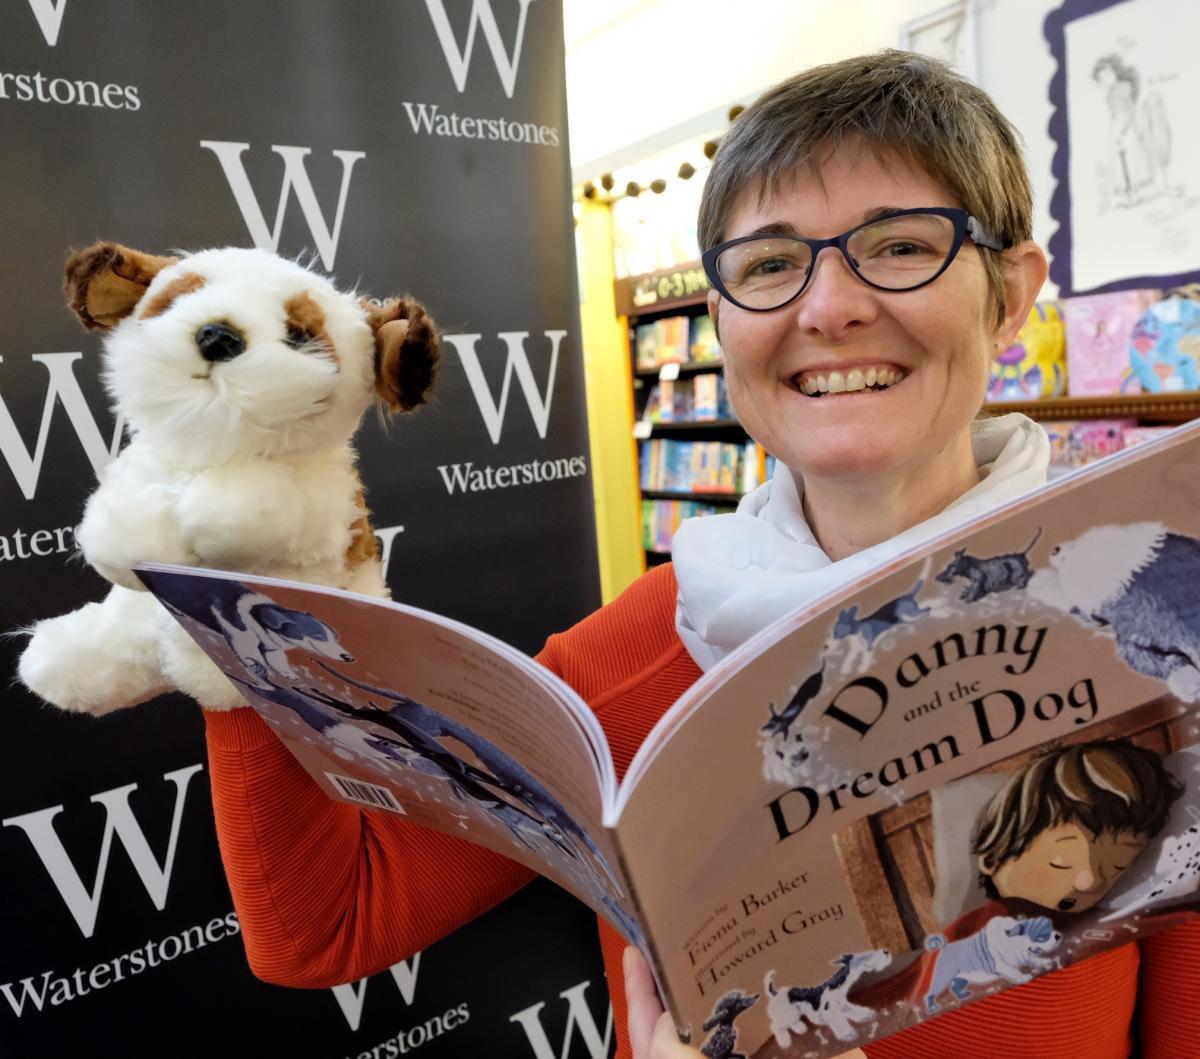 Author Fiona Barker reads a copy of Danny and the Dream Dog